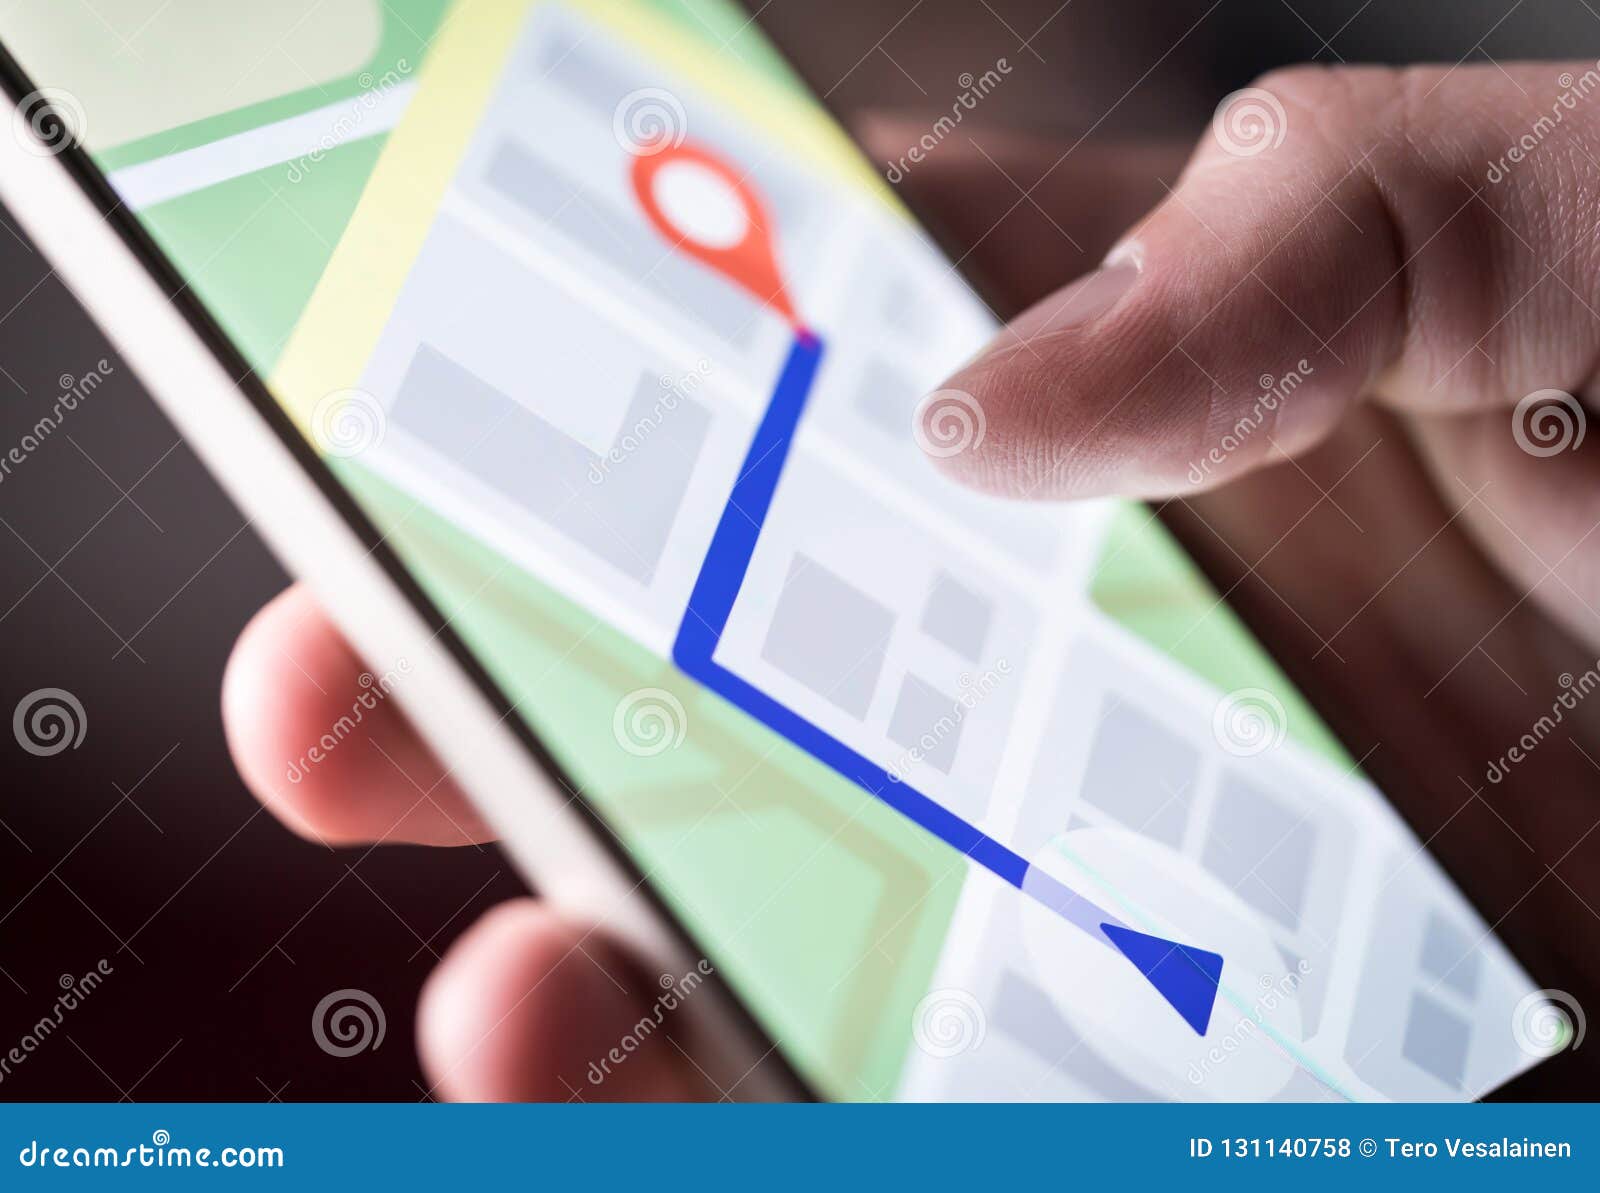 map application in smartphone. man navigating in city with mobile phone.